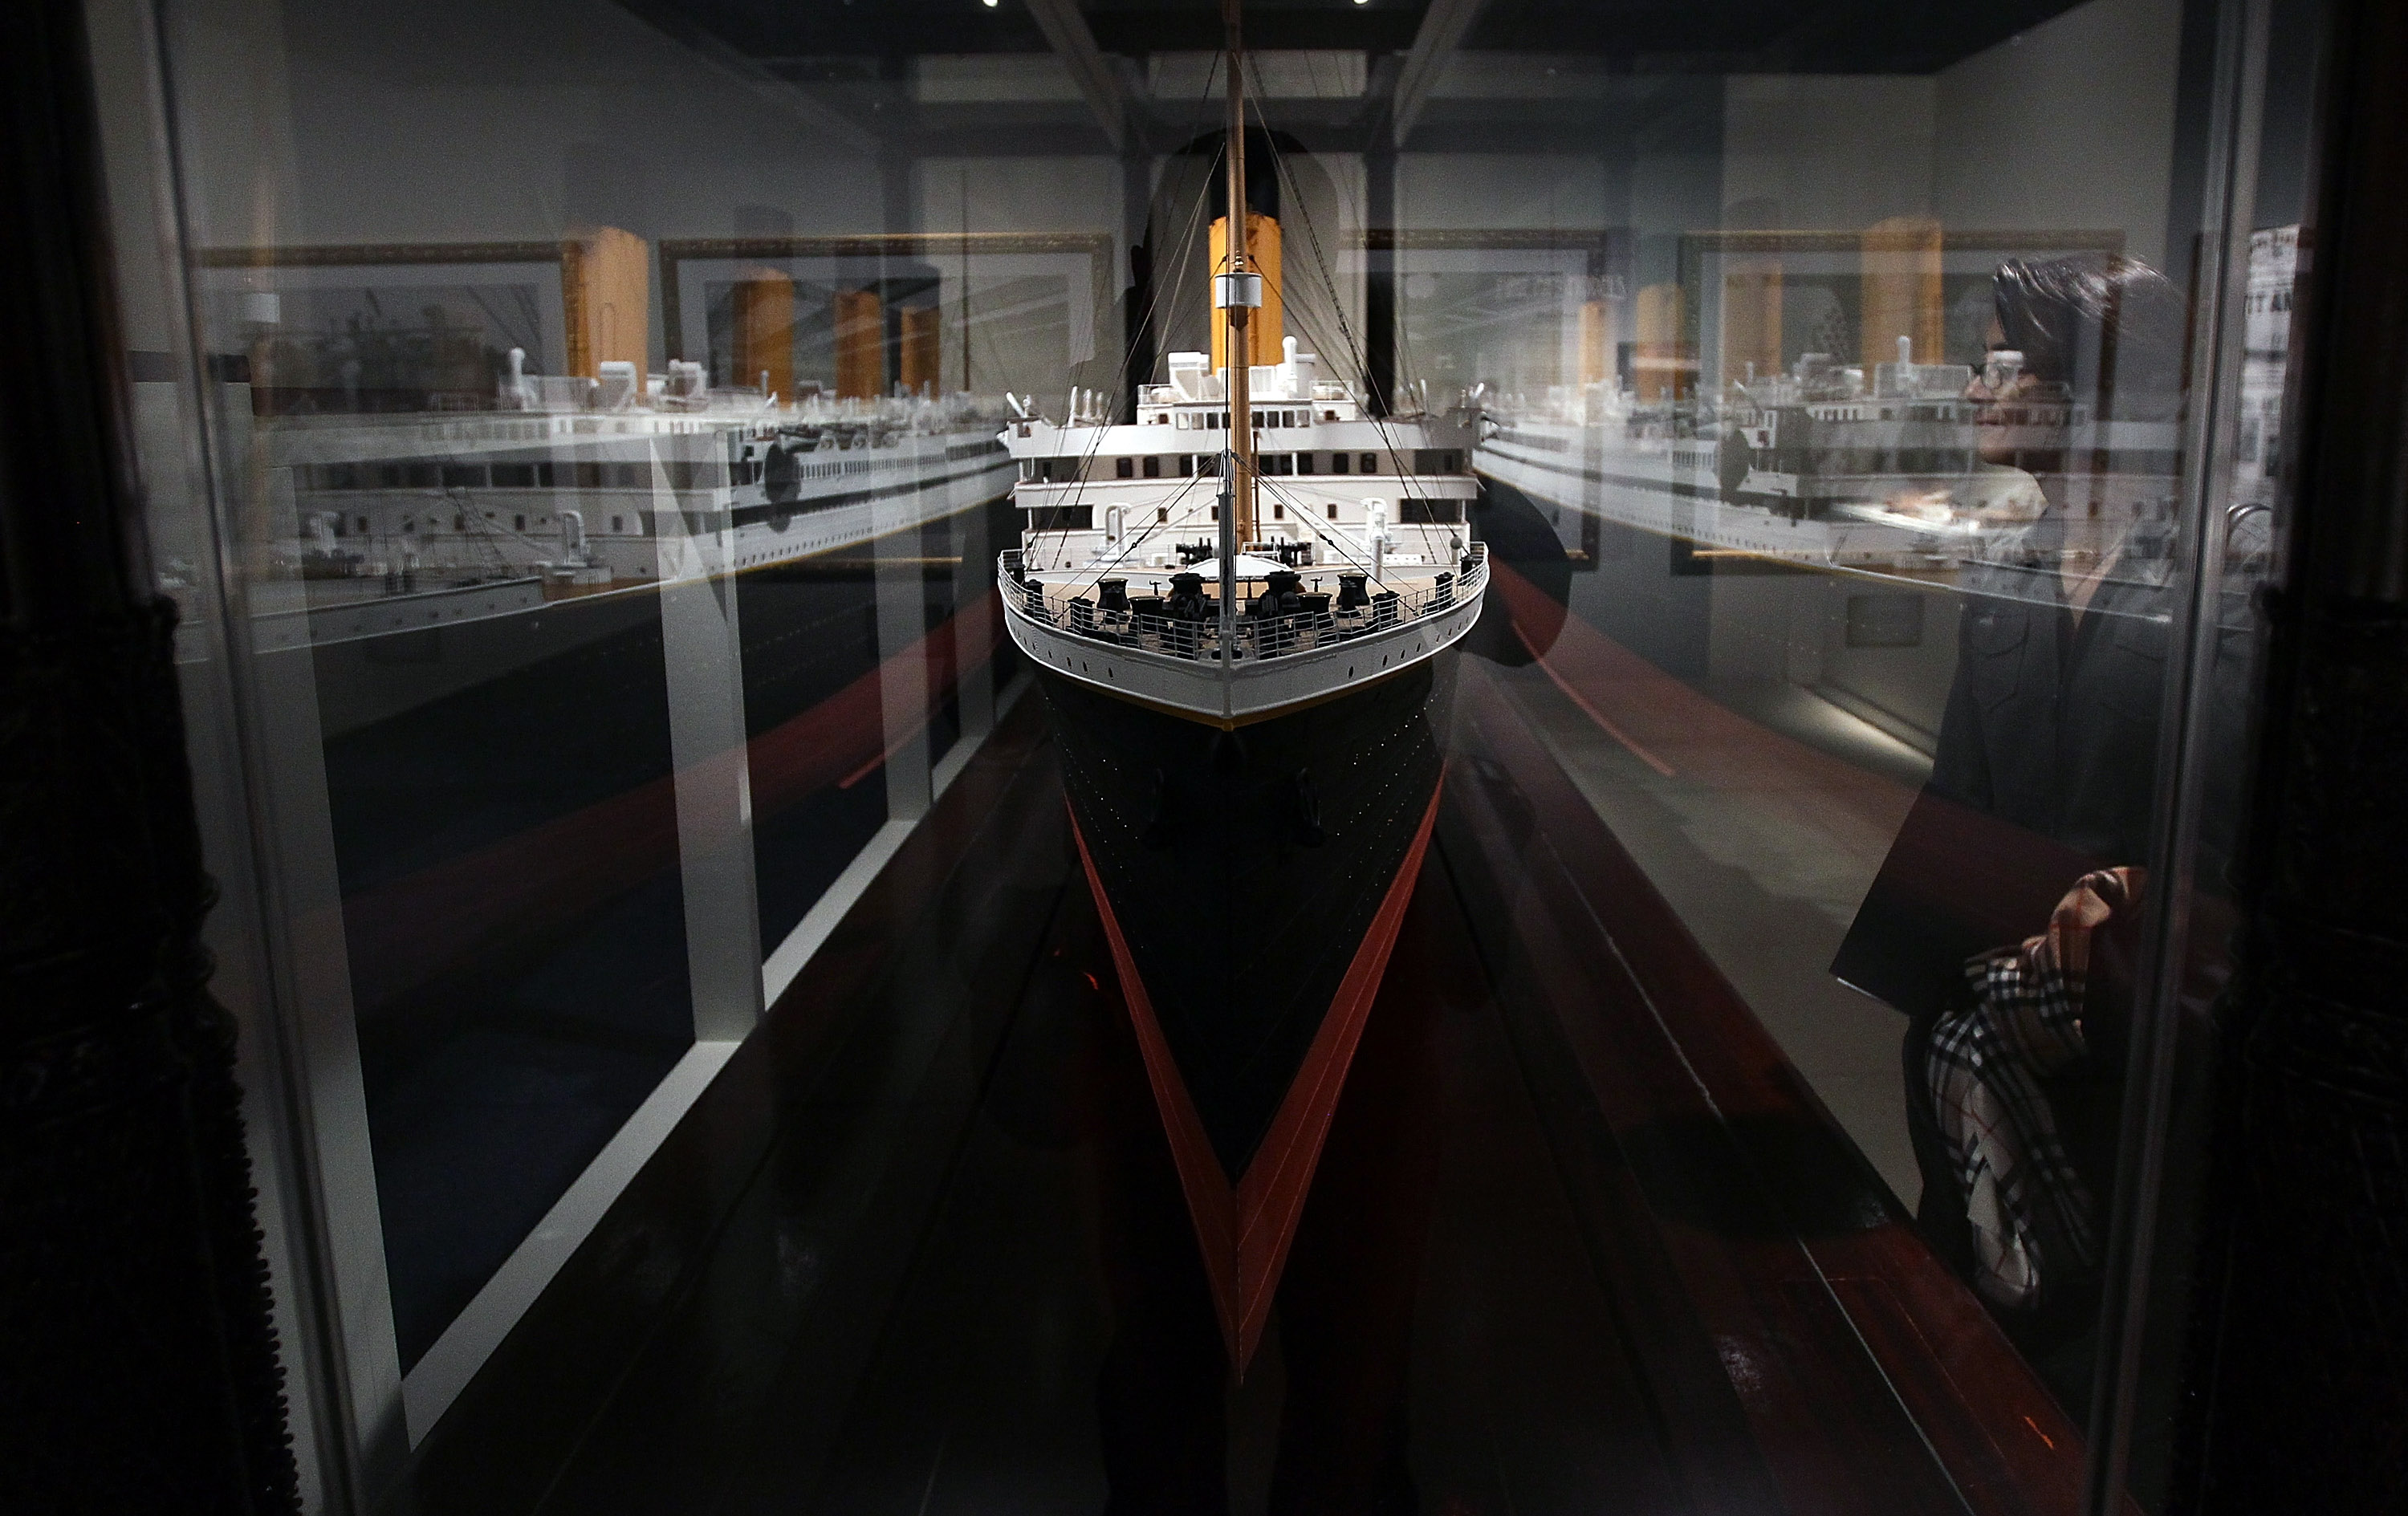 Why are we so fascinated with the Titanic?